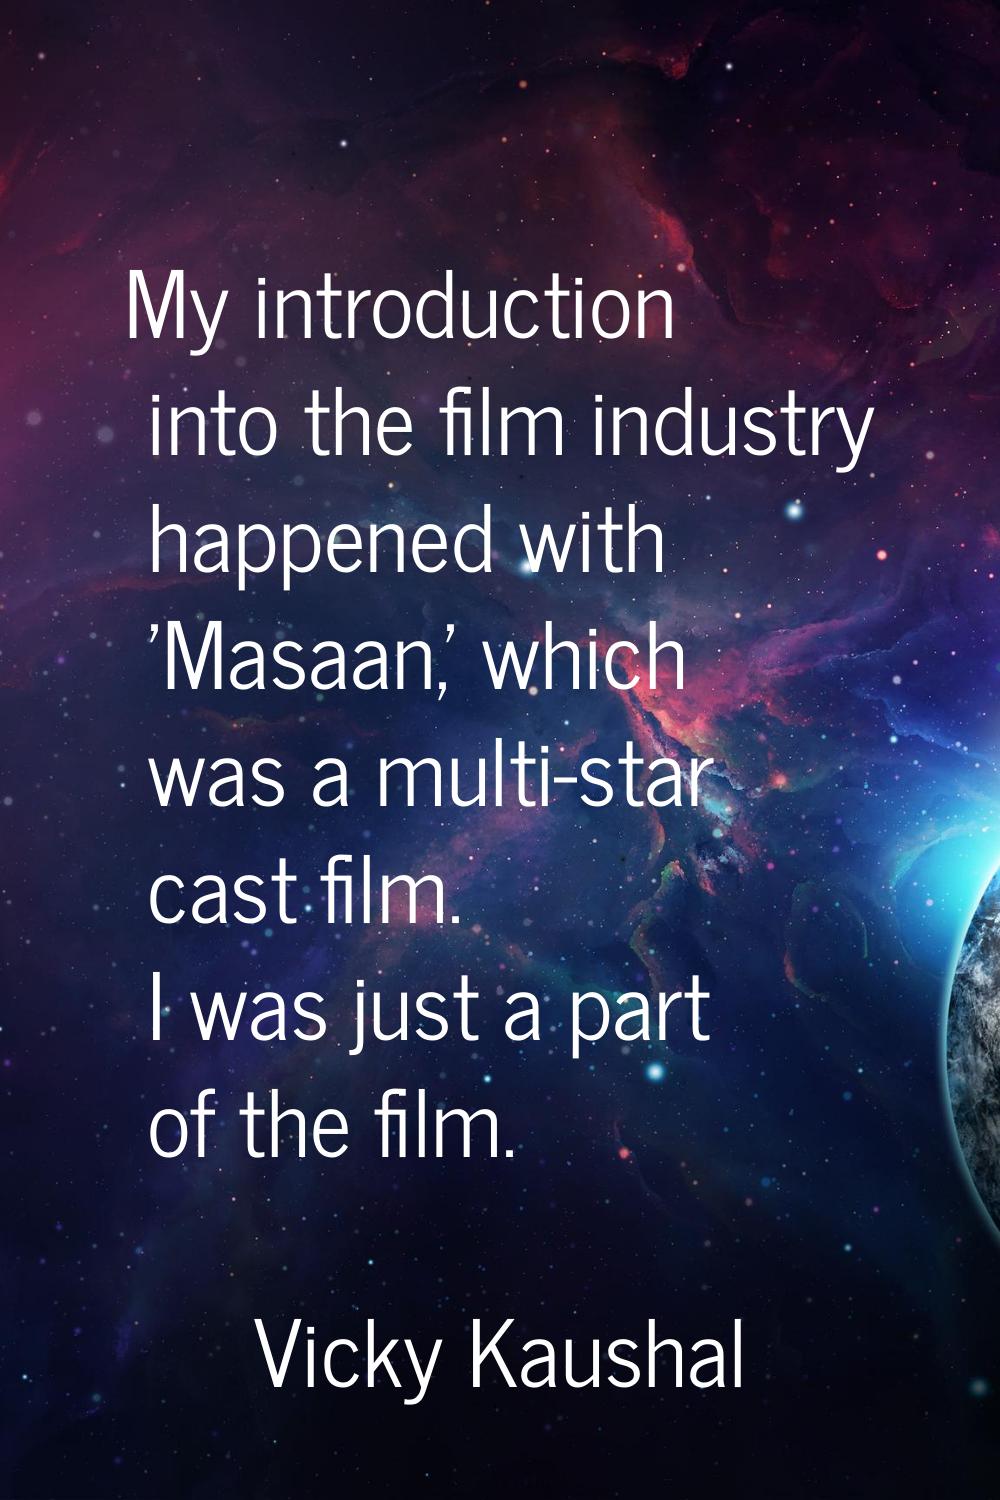 My introduction into the film industry happened with 'Masaan,' which was a multi-star cast film. I 